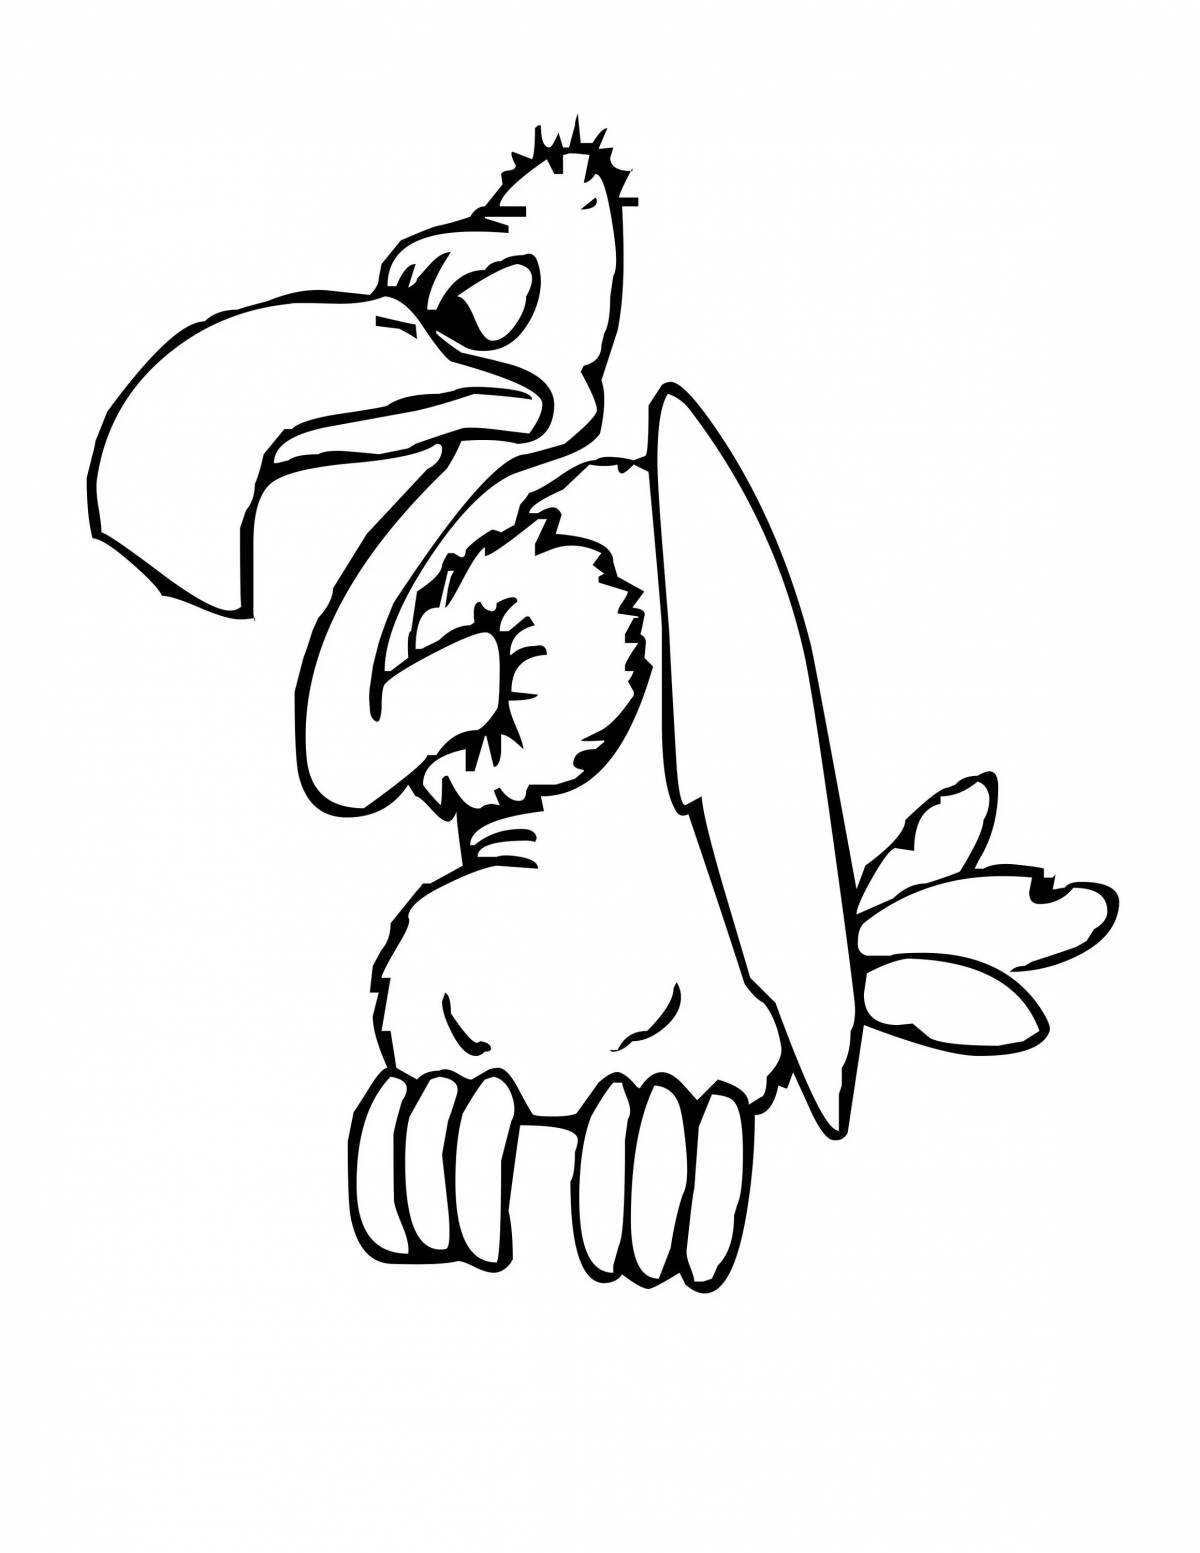 Great vulture coloring page